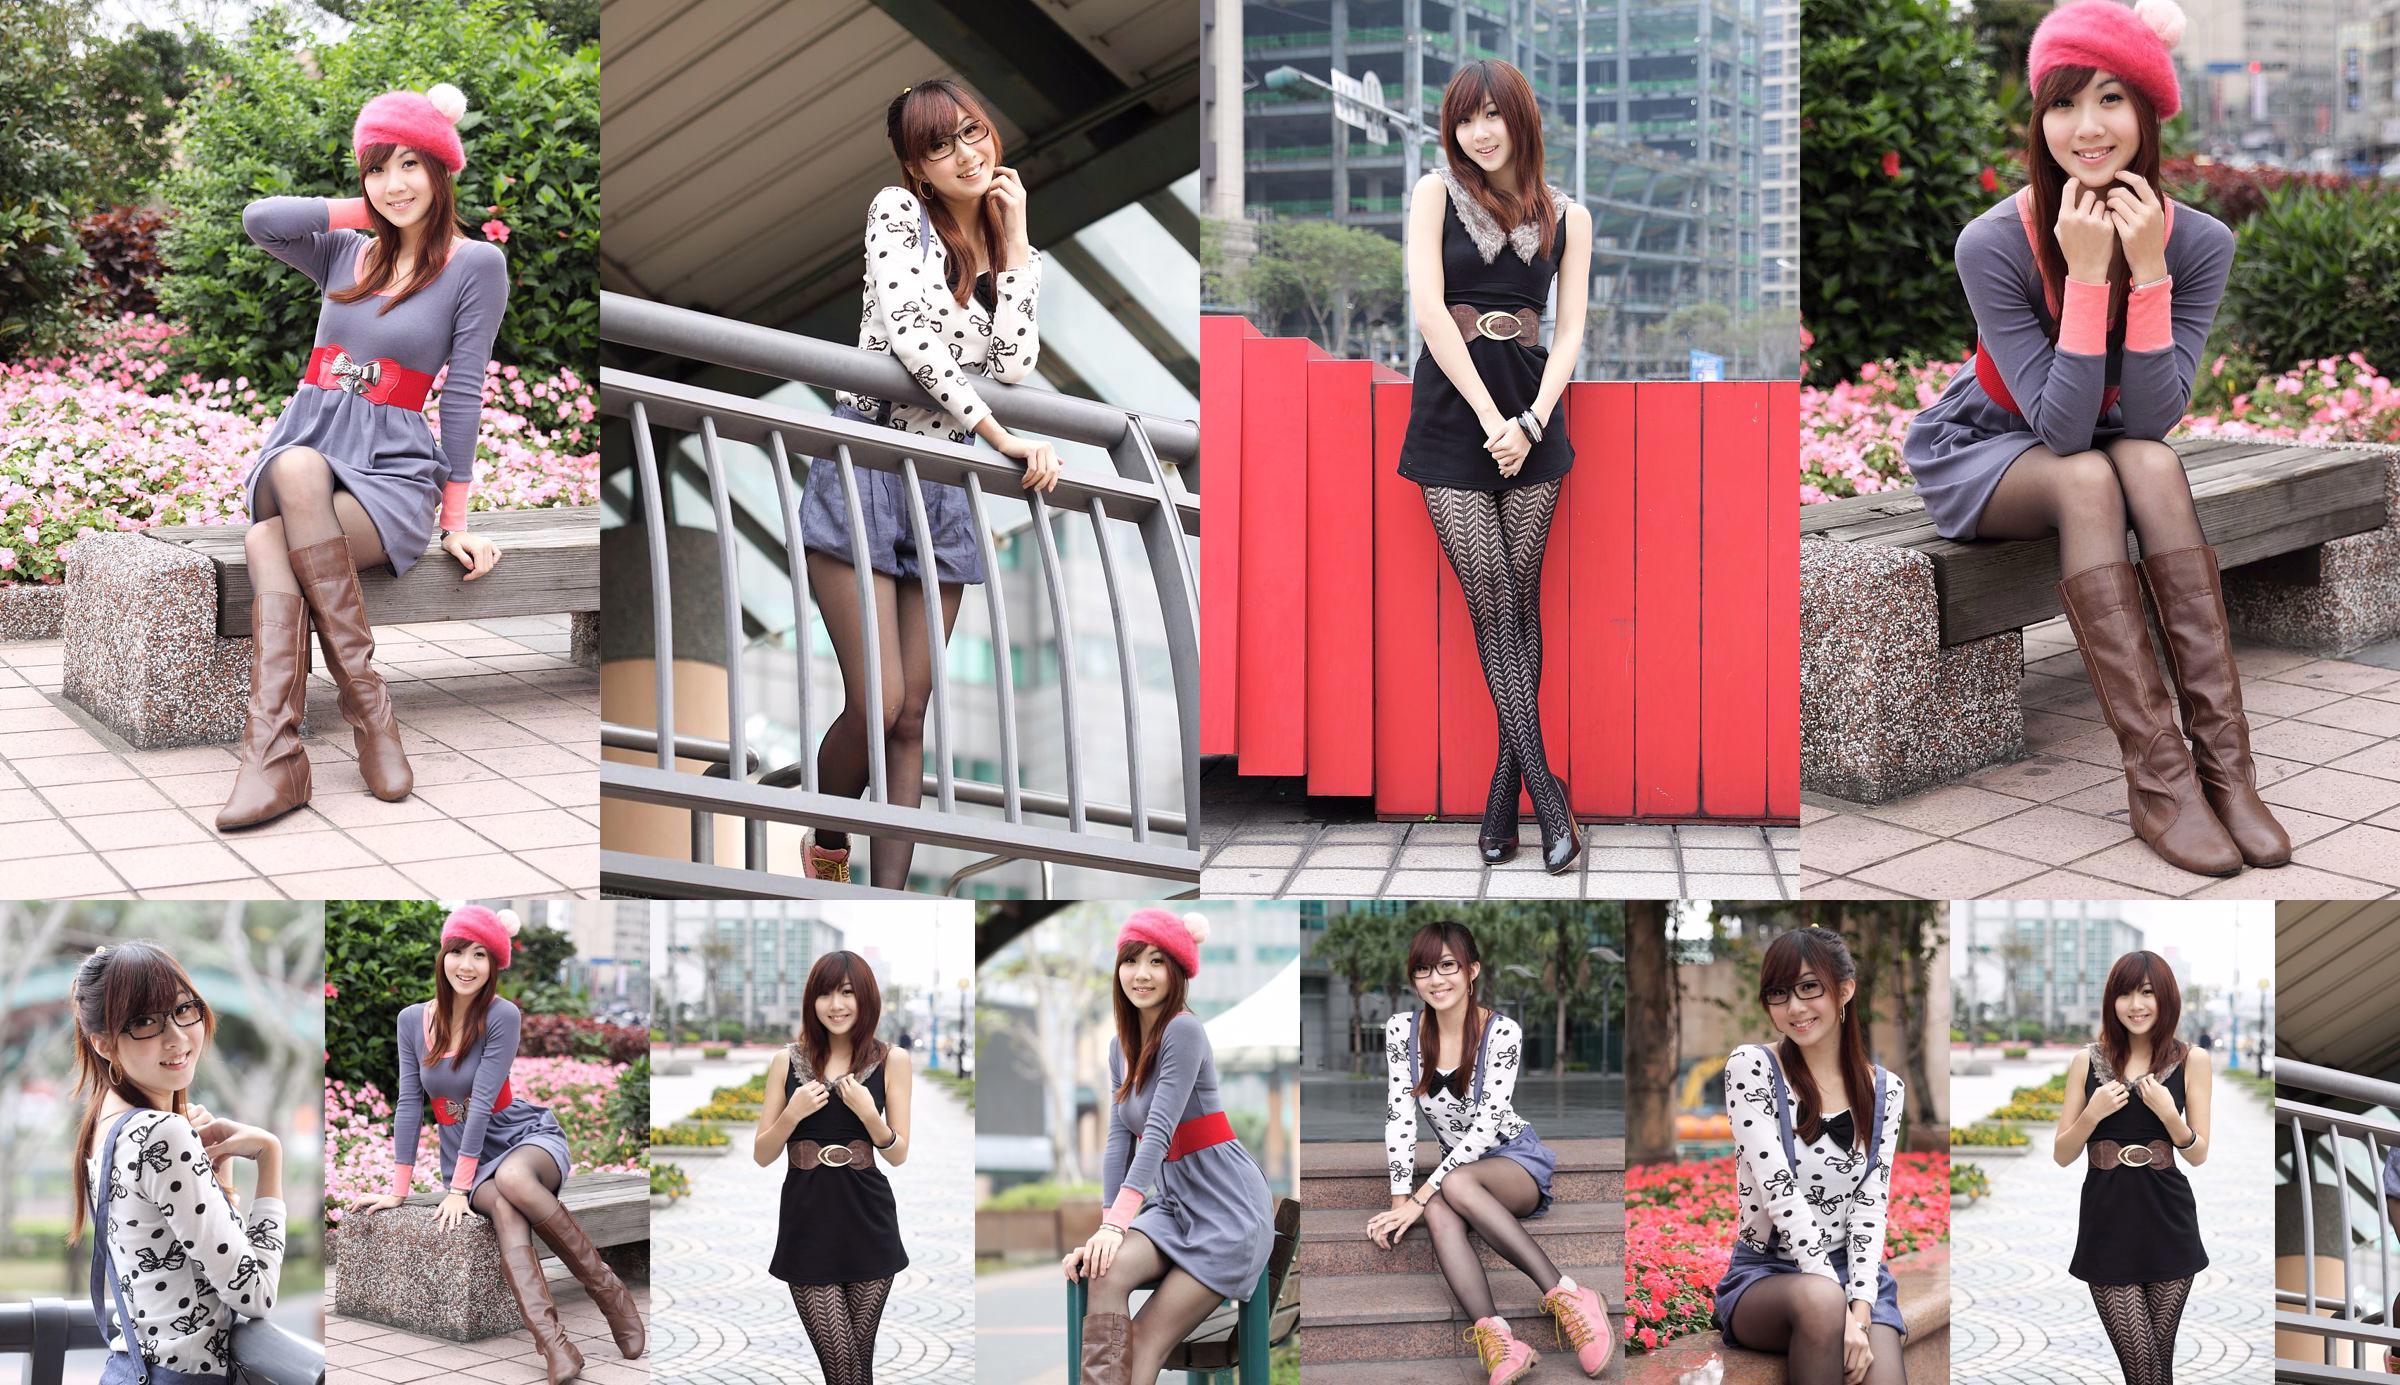 Photo Collection of Taiwan's Pure Beauty Angel "Black Silk Street Photographs" No.4aeedd Page 1